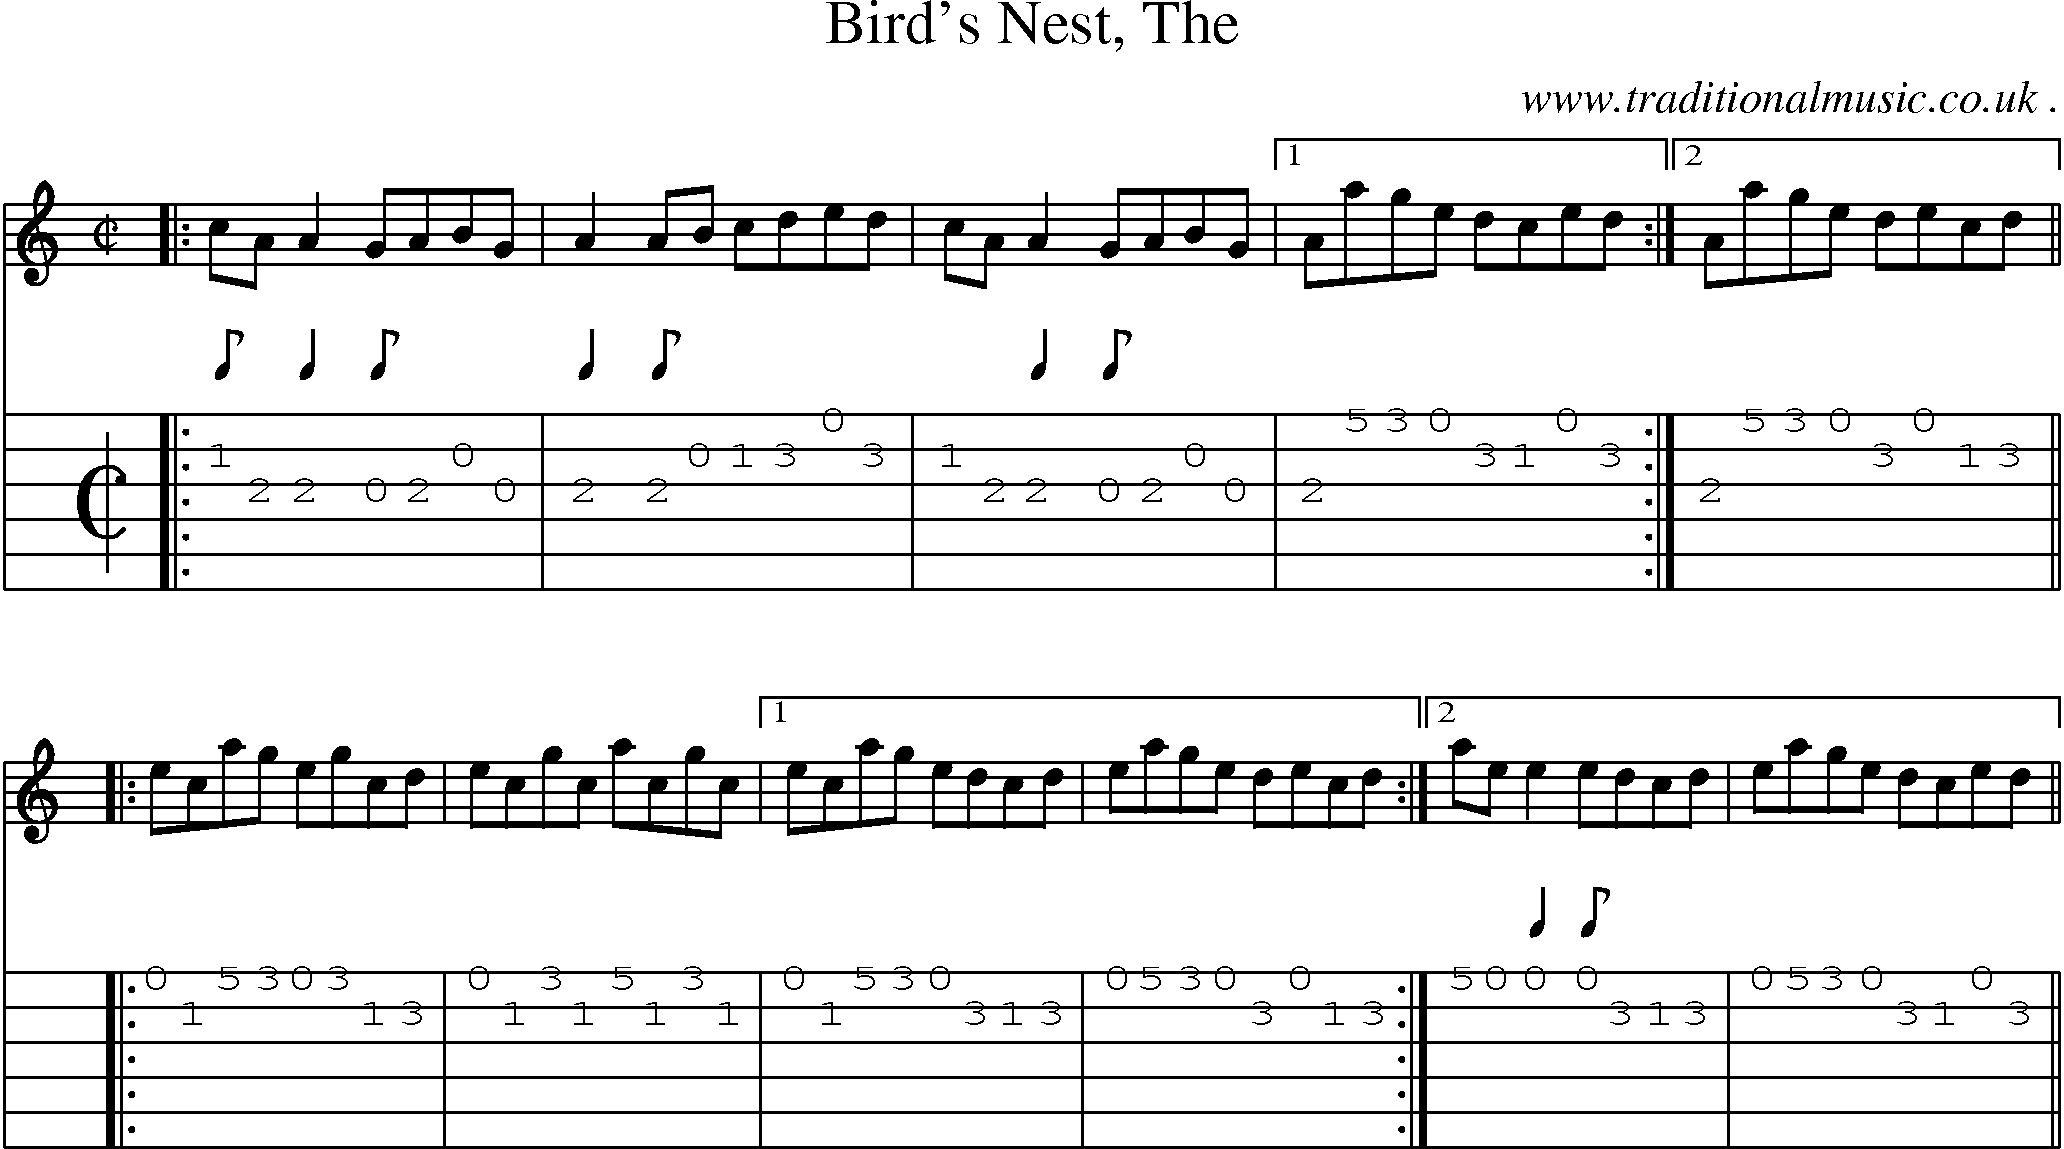 Music Score and Guitar Tabs for Birds Nest